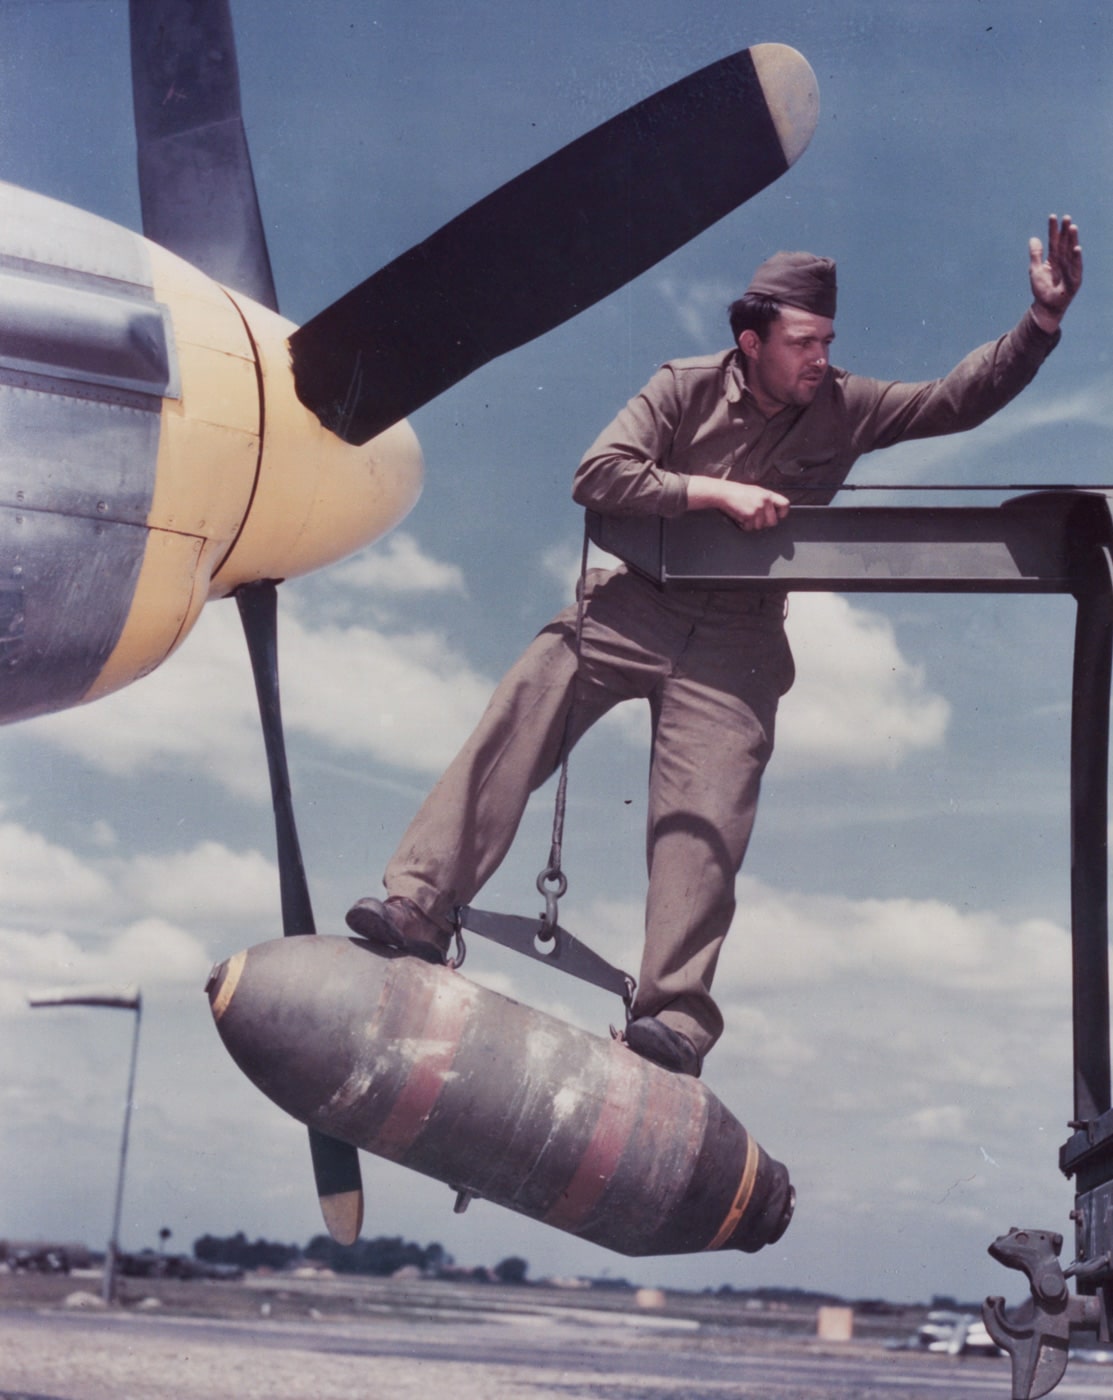 loading a bomb on the p-51